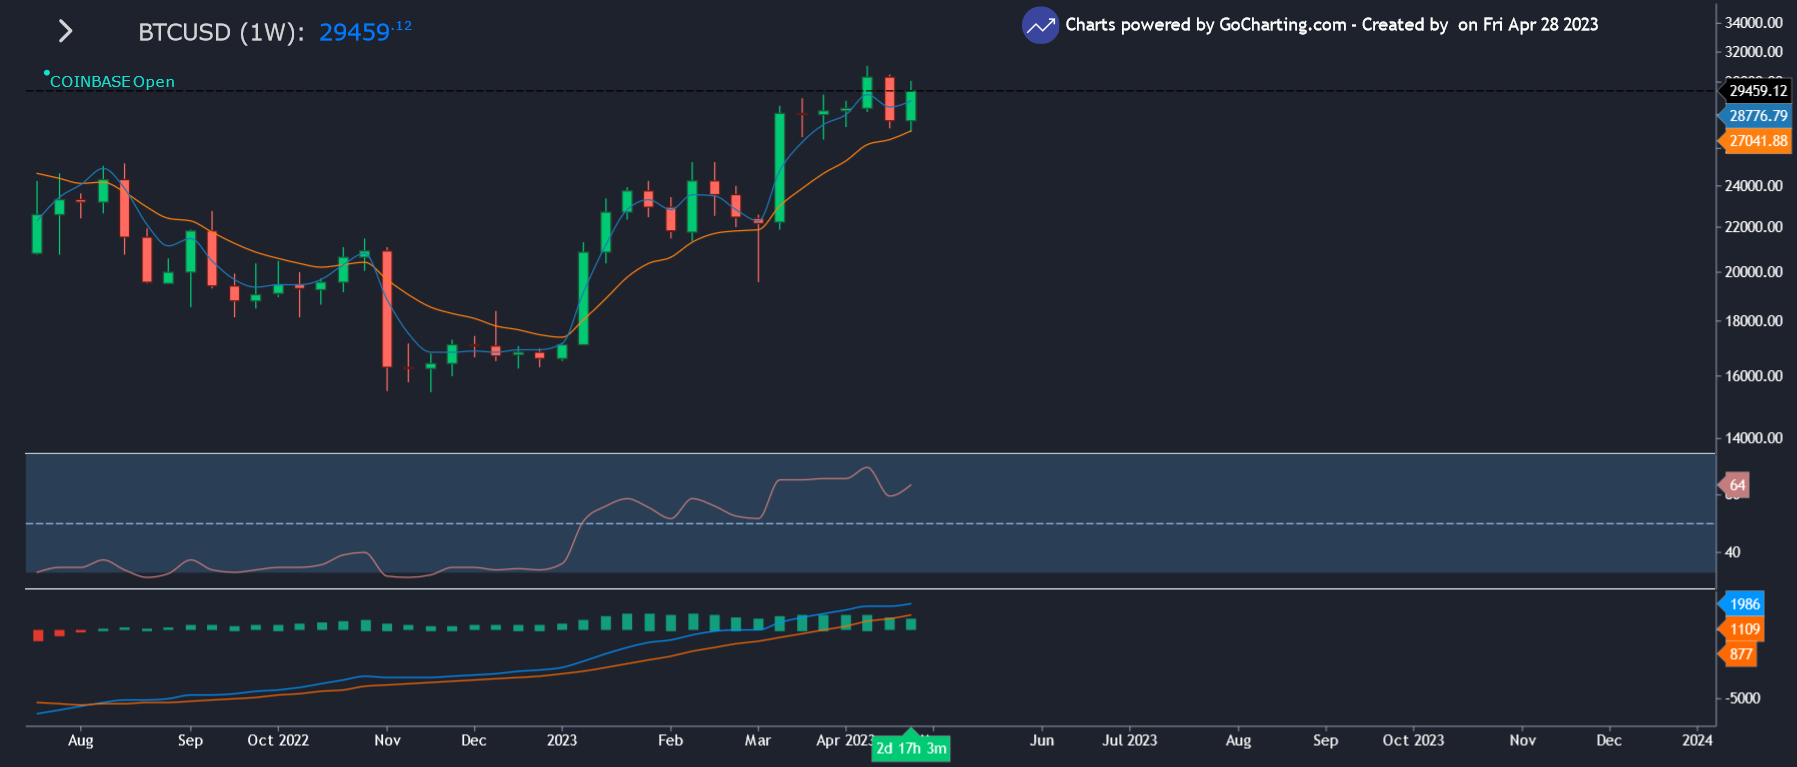 Bitcoin Price: BTC/USD Weekly chart showing the price – GoCharting